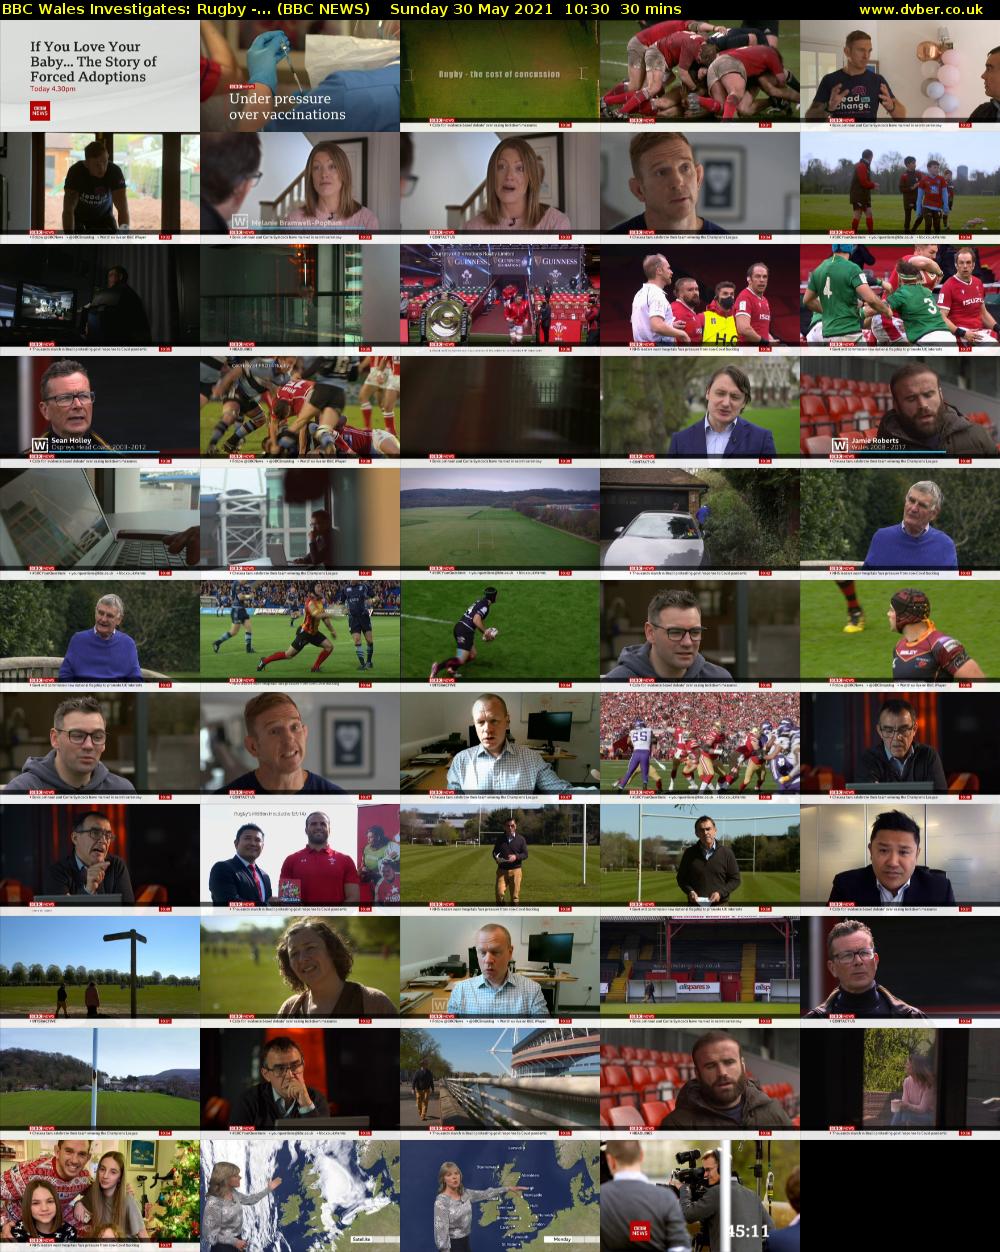 BBC Wales Investigates: Rugby -... (BBC NEWS) Sunday 30 May 2021 10:30 - 11:00